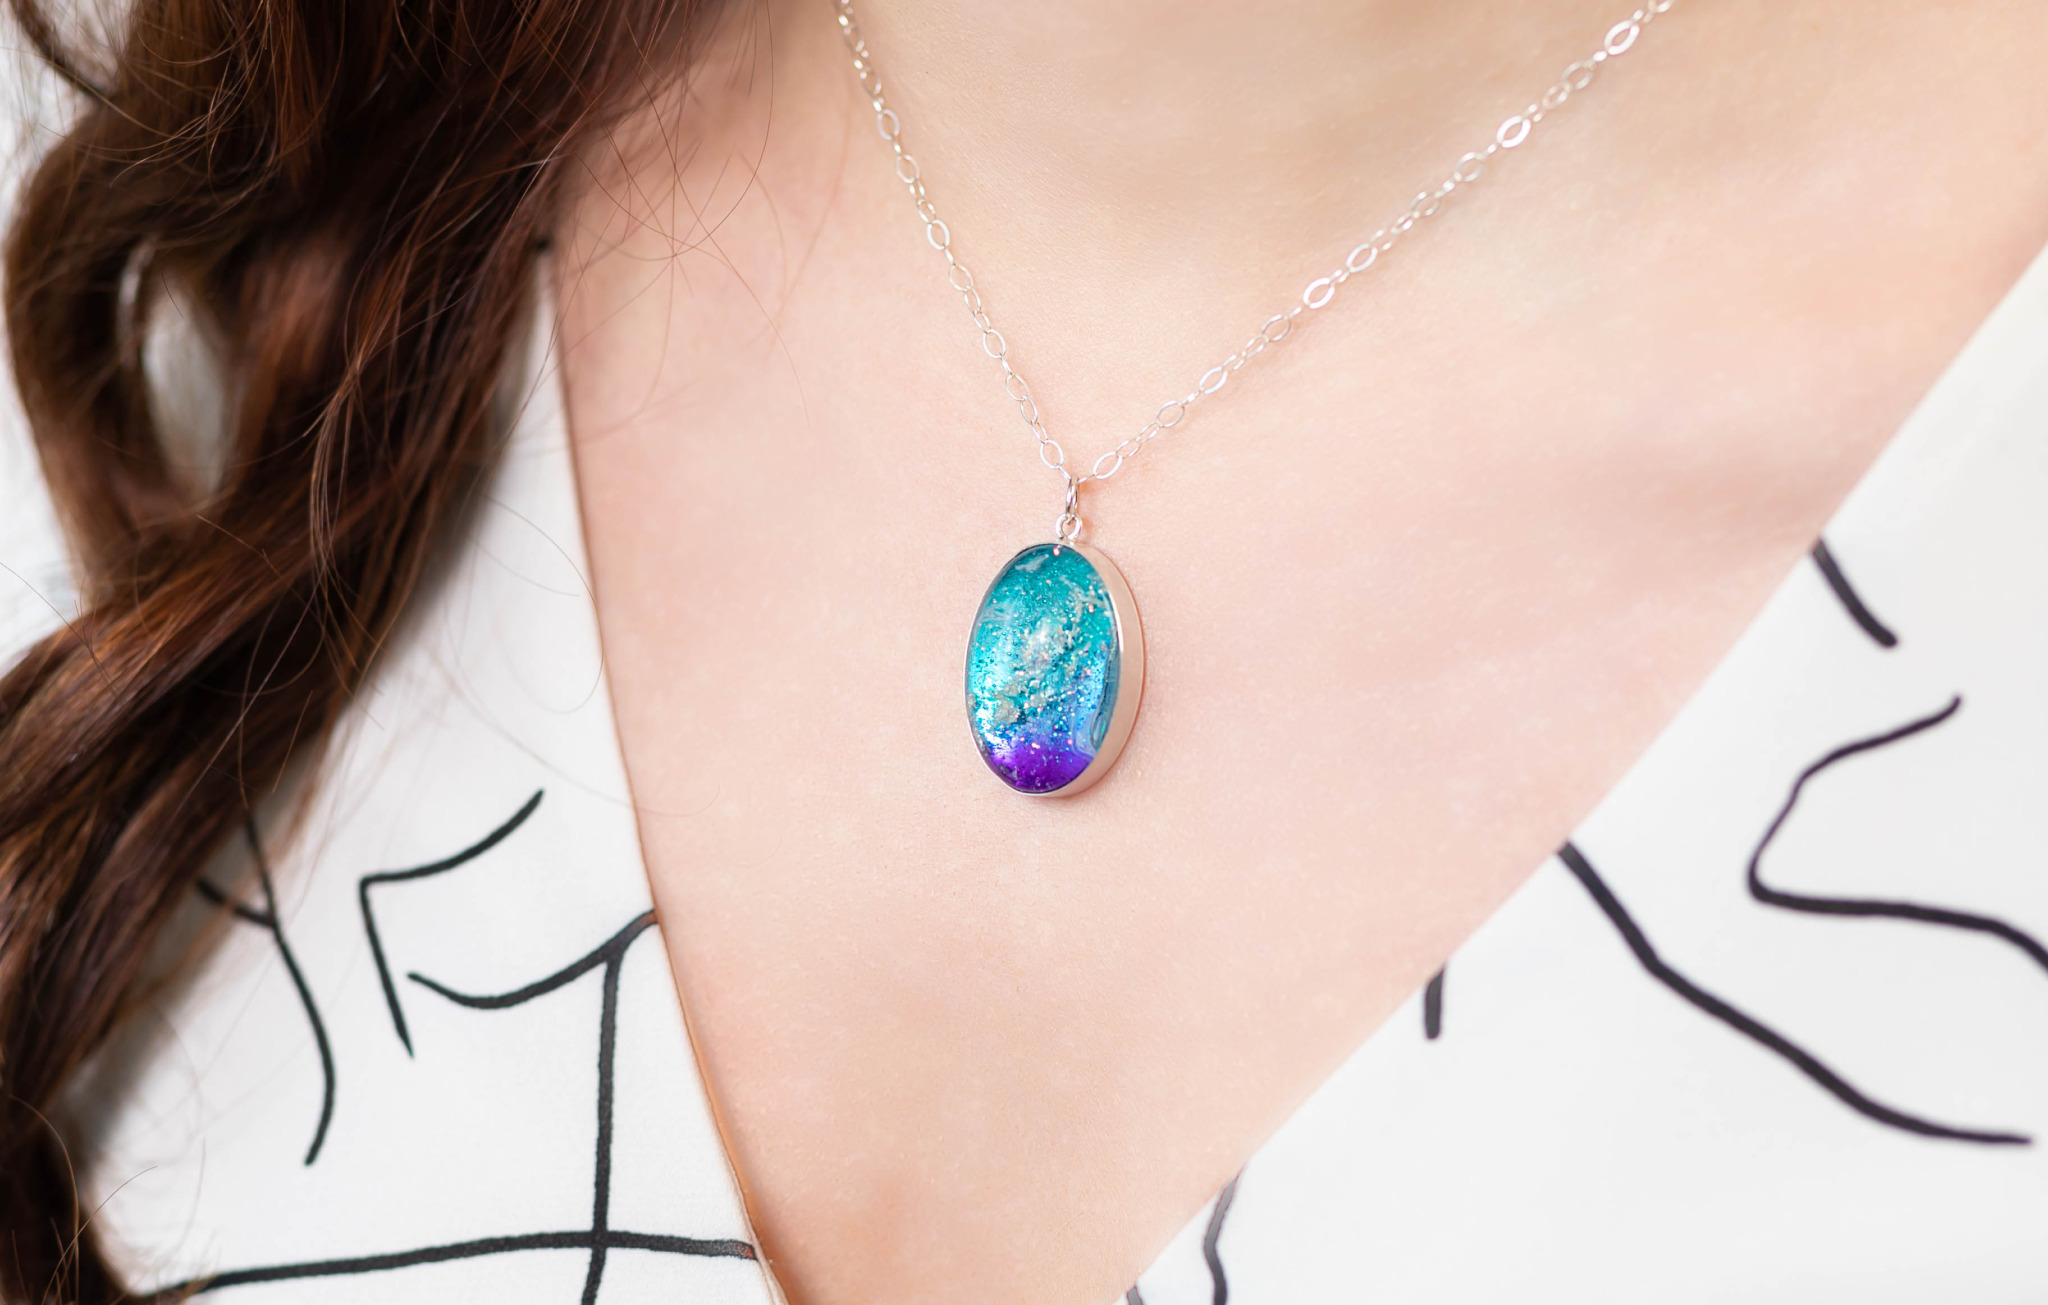 CELEBRATION ASHES OVAL RESIN PENDANT MEMORIAL NECKLACE | CREMATION JEWELRY | STELLAR GLASS AND RESIN NECKLACE